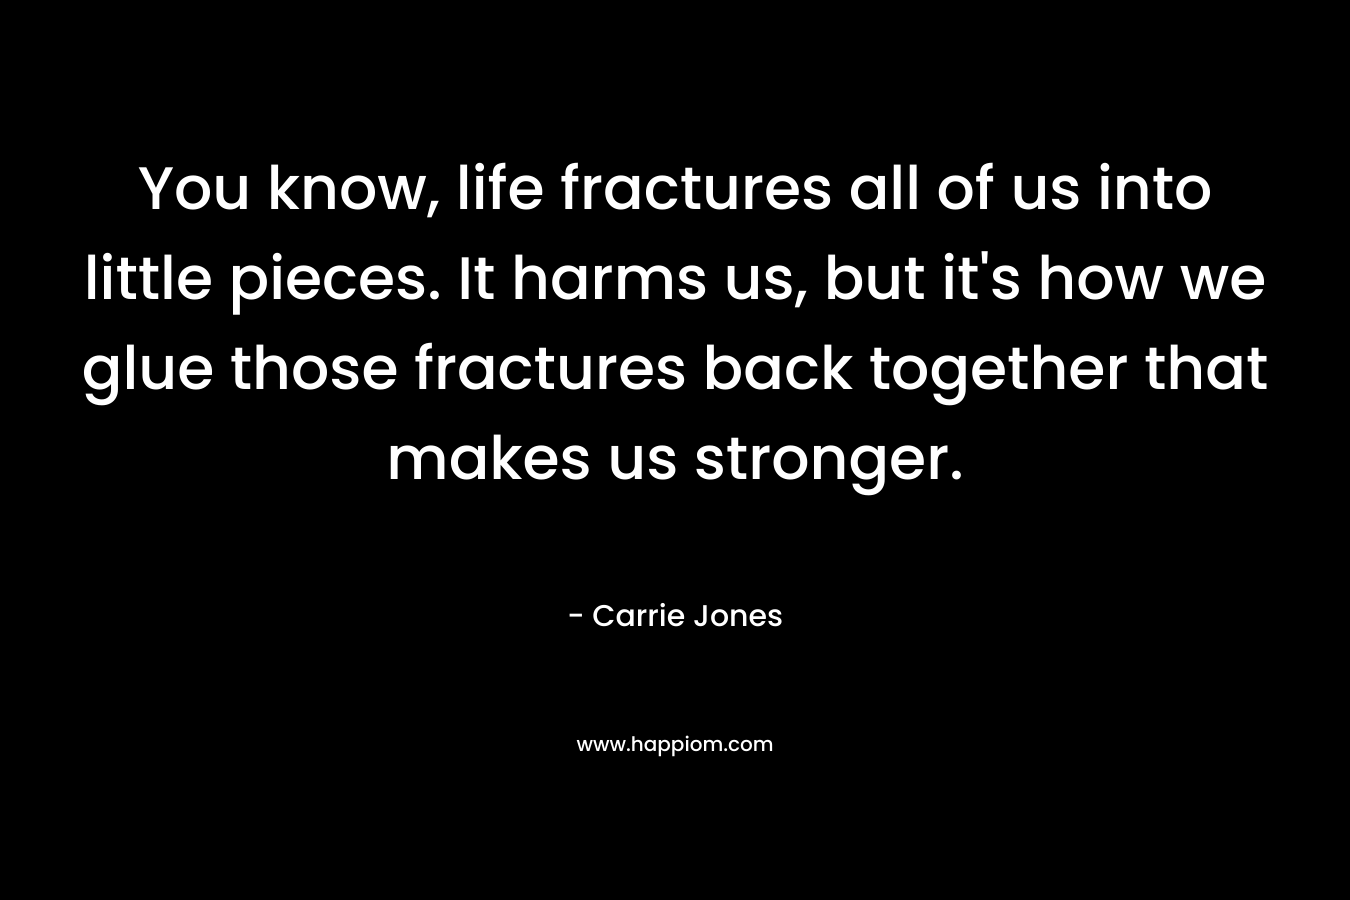 You know, life fractures all of us into little pieces. It harms us, but it’s how we glue those fractures back together that makes us stronger. – Carrie Jones